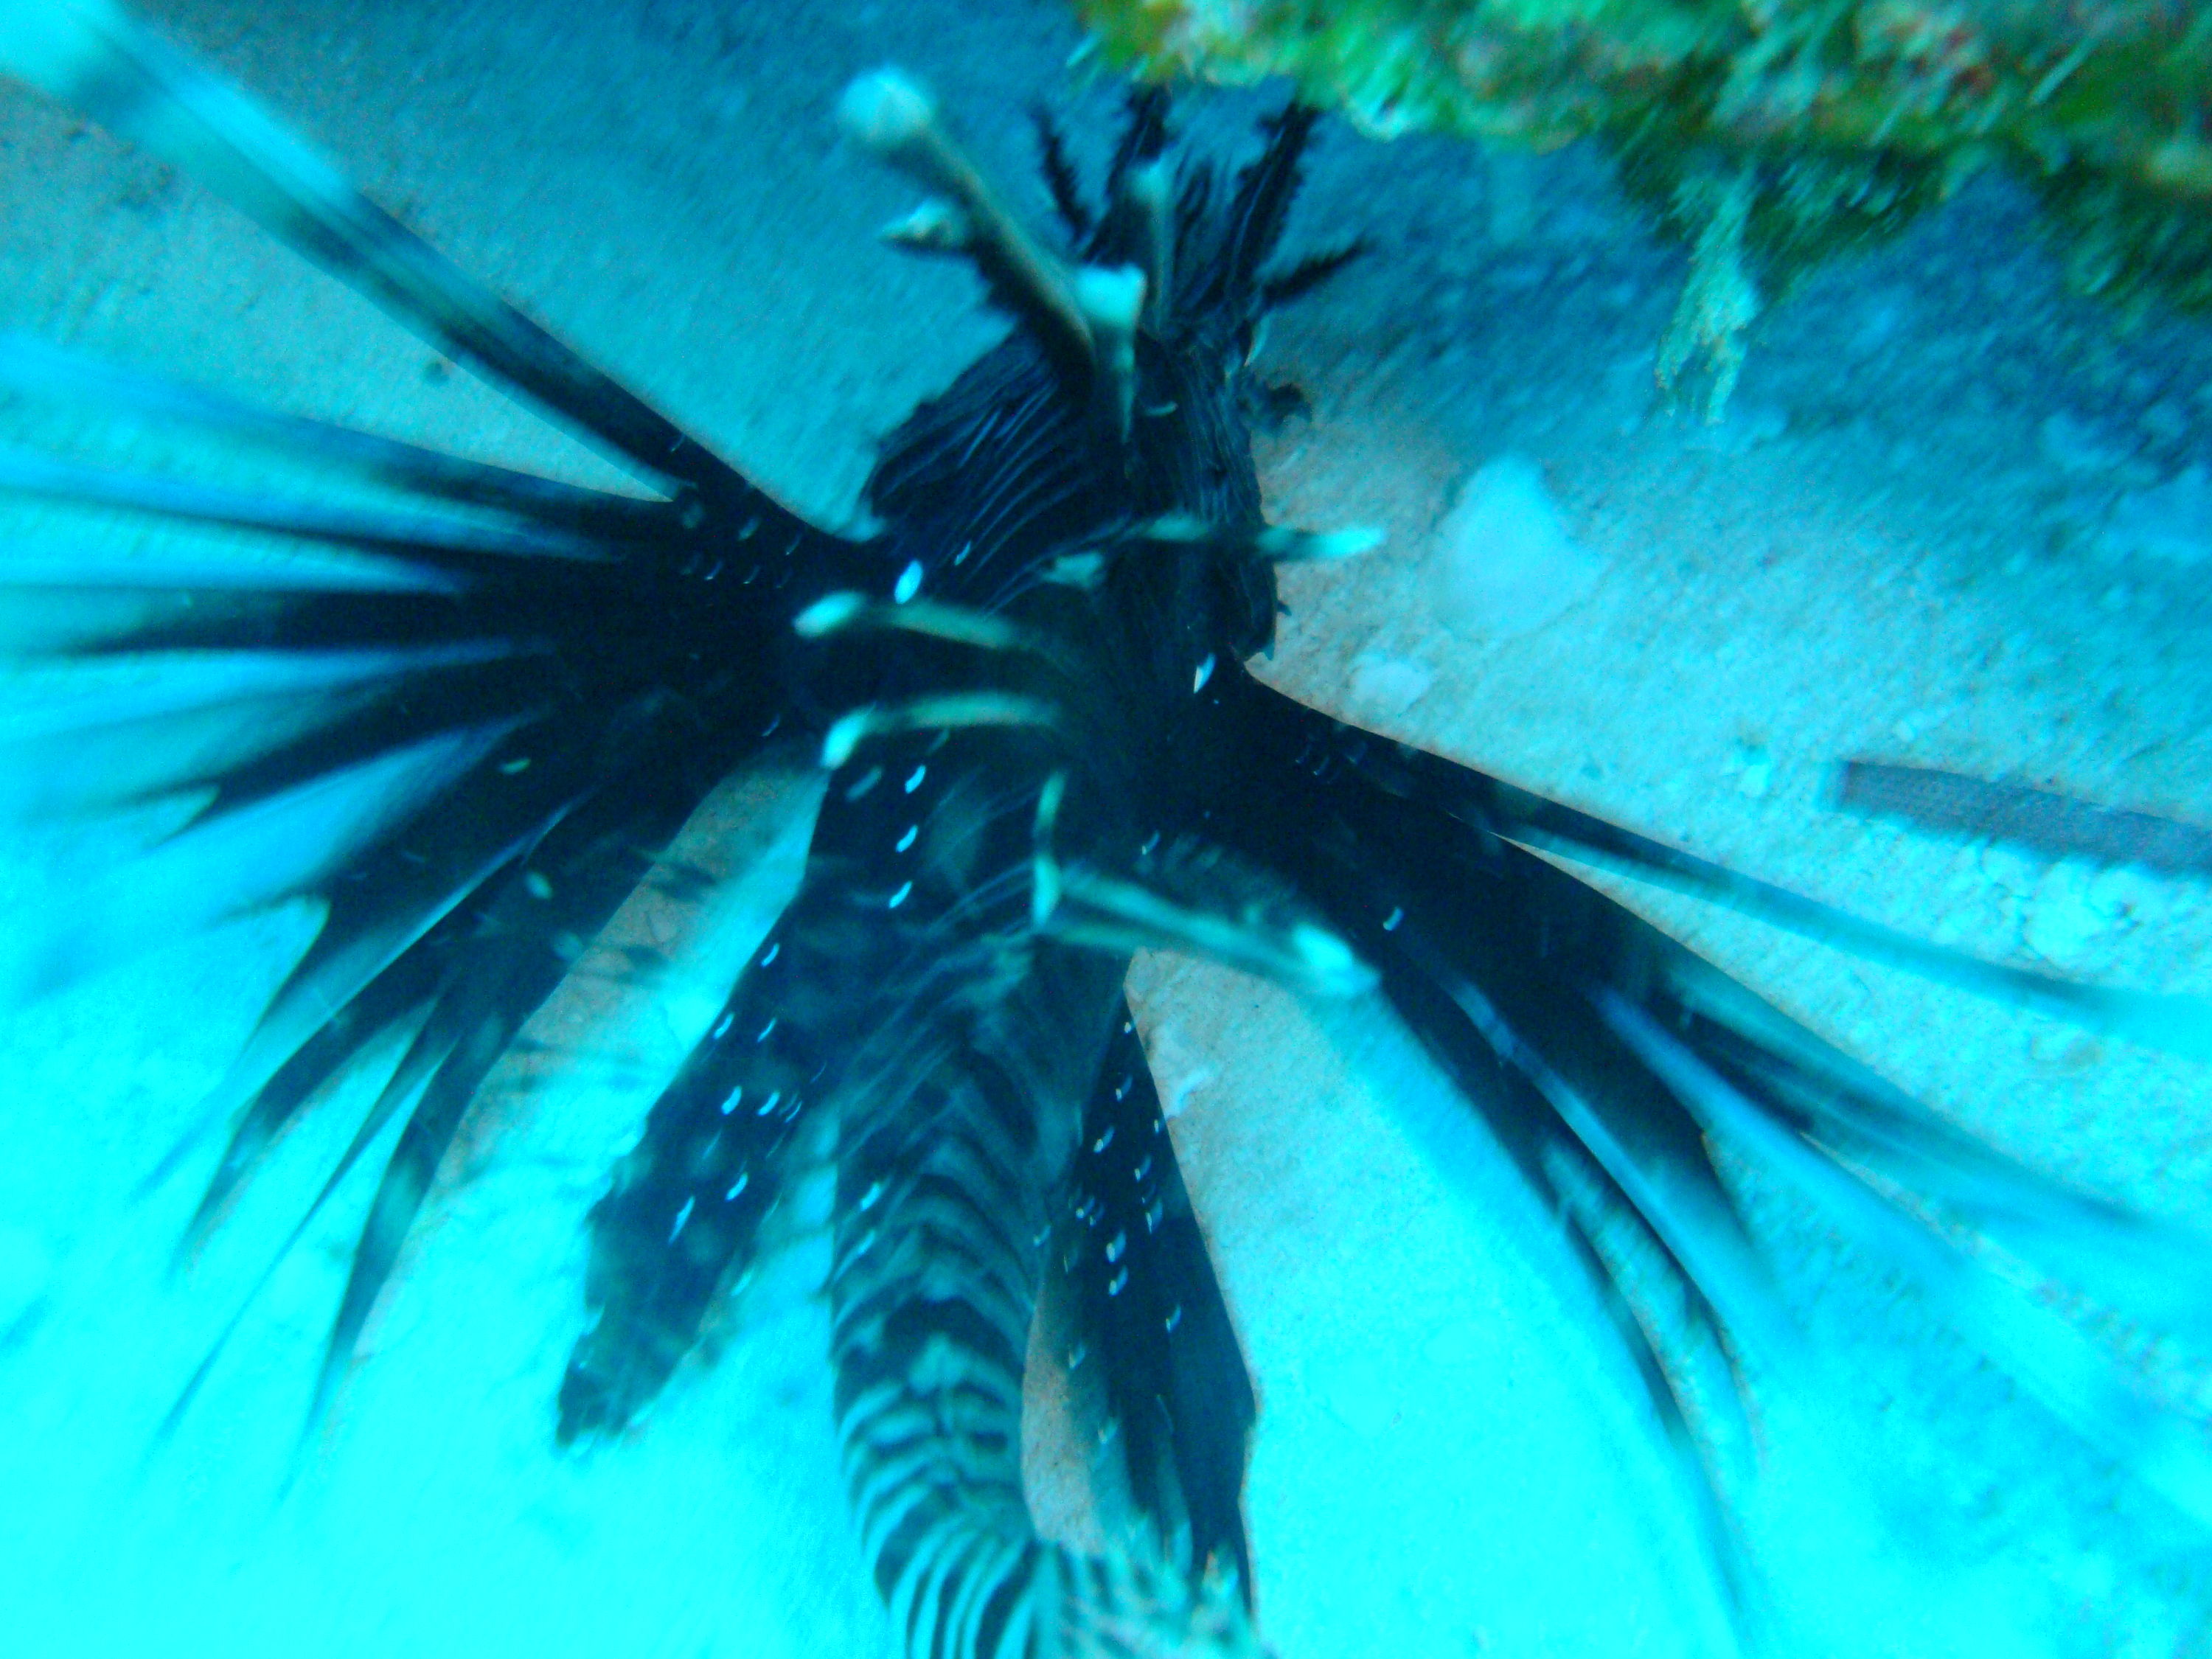 Wanted Dead or Alive! Lionfish